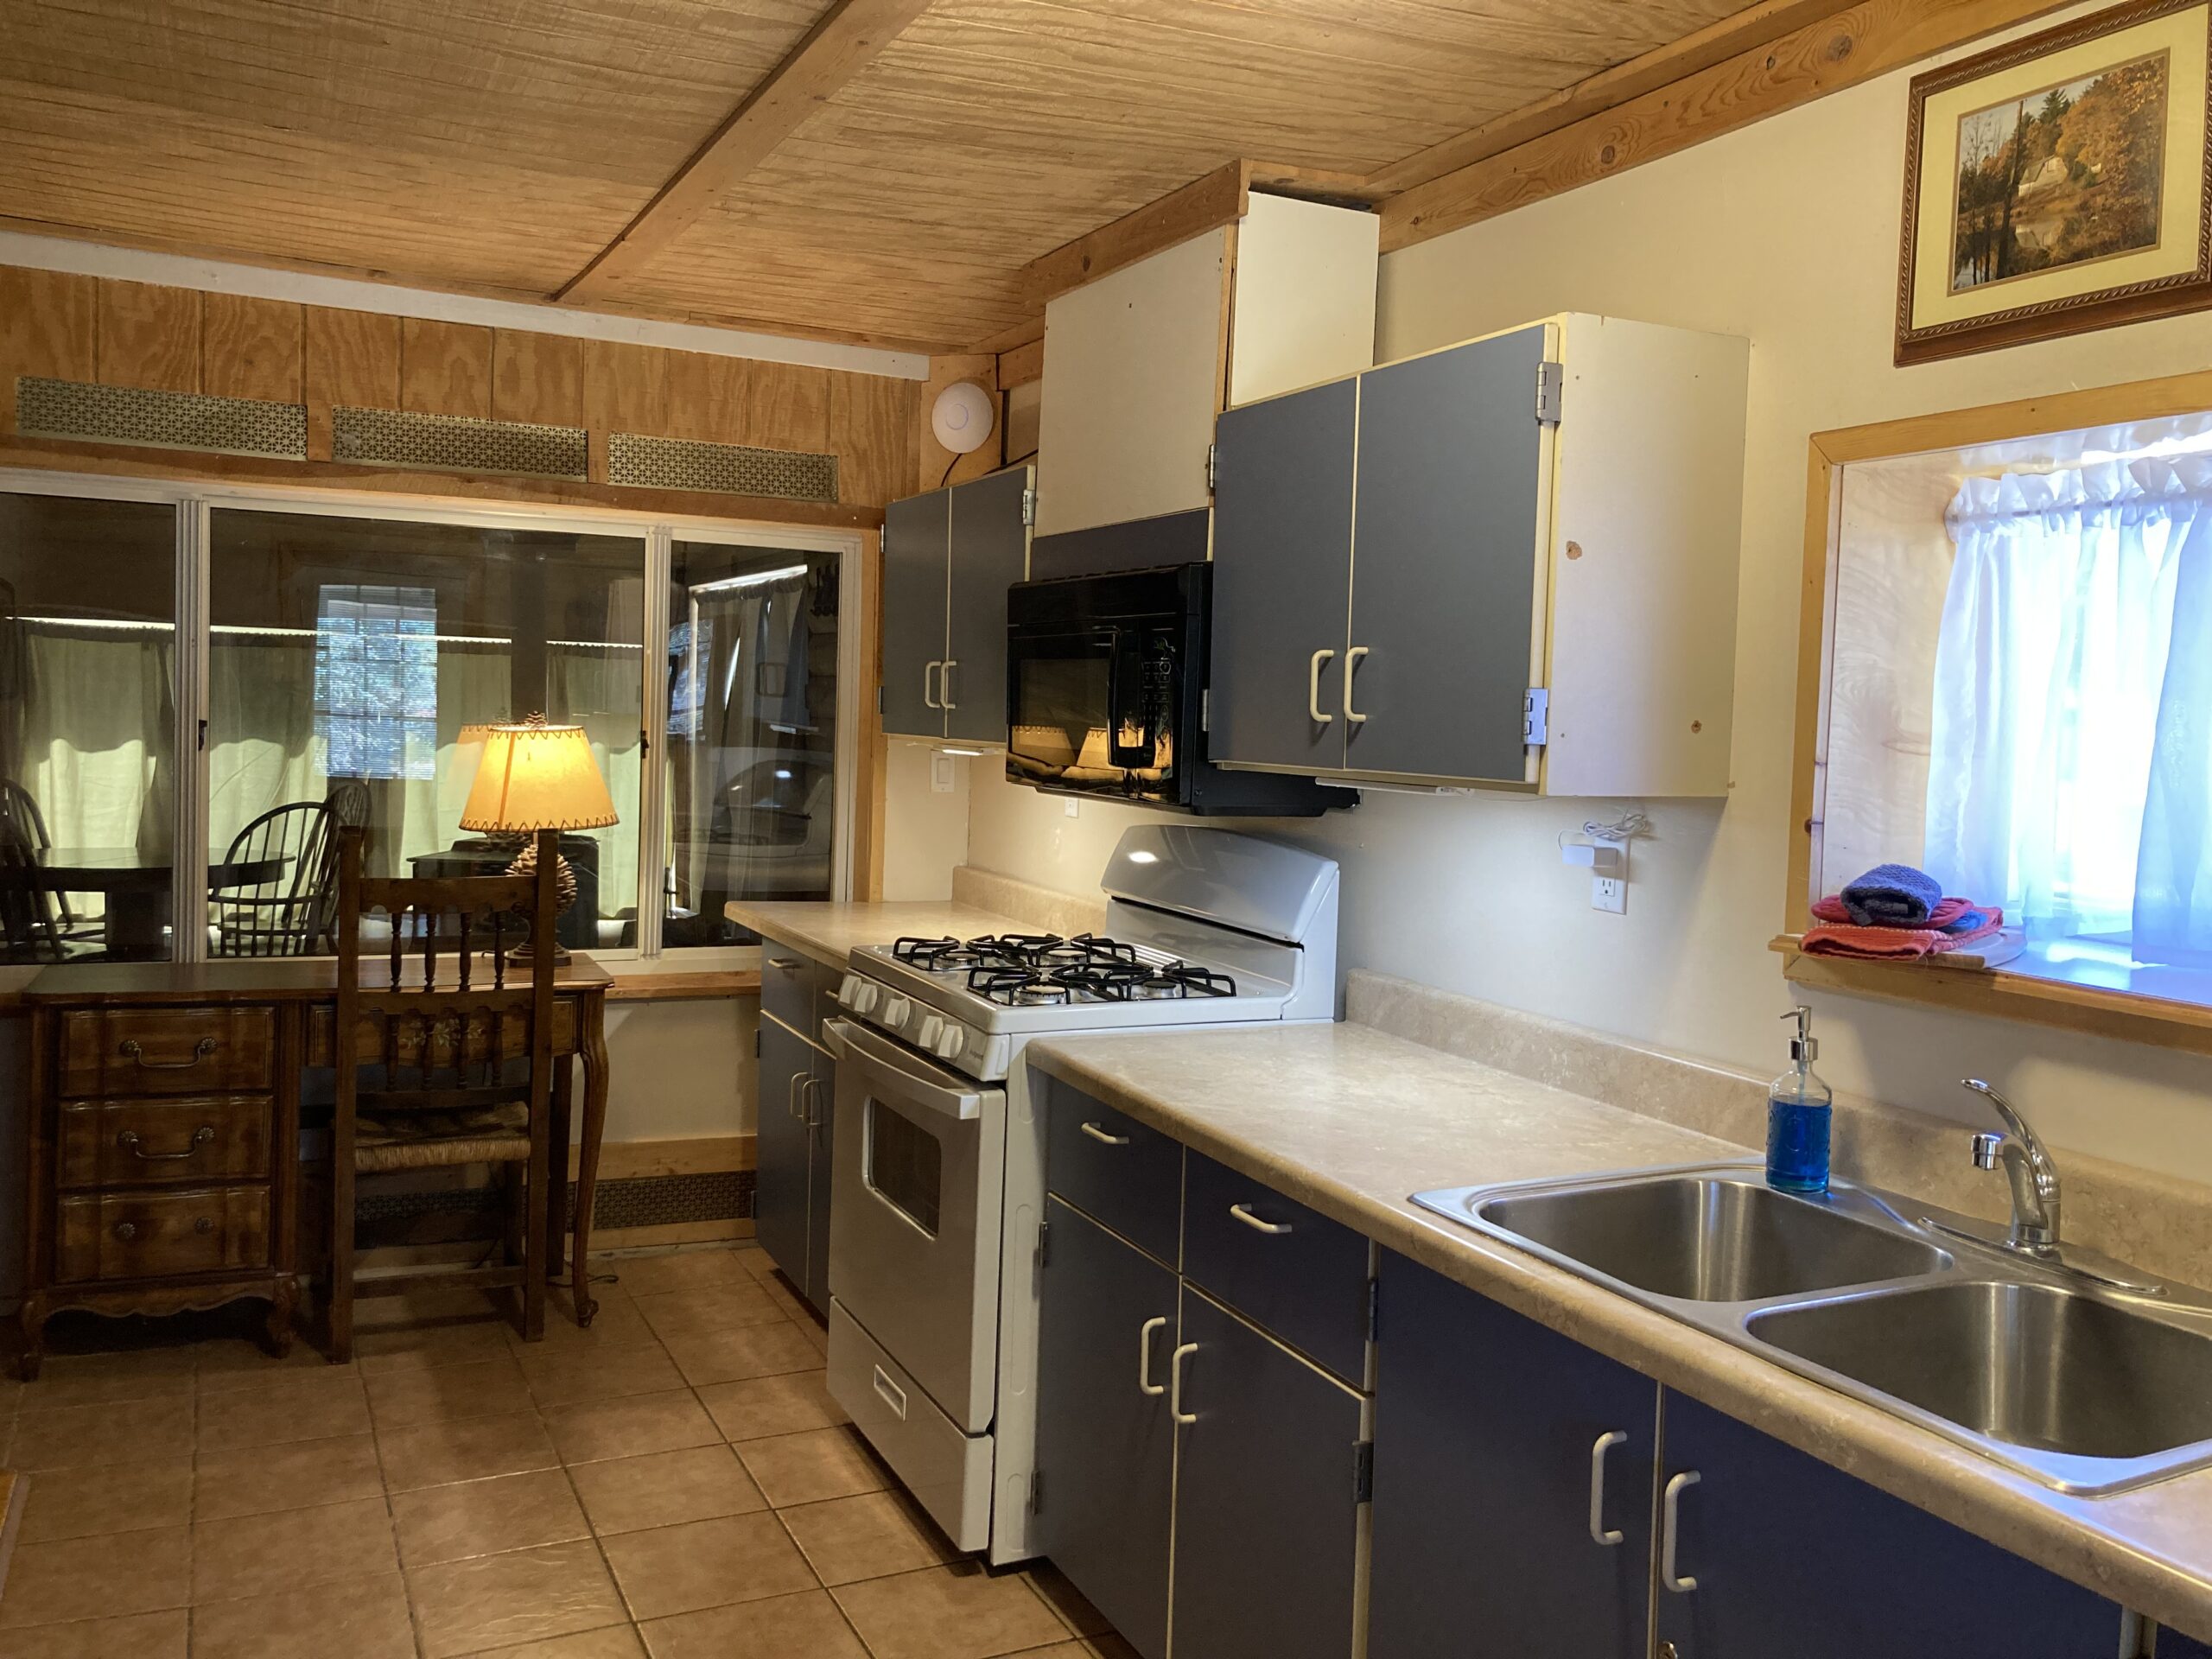 Cabin has full kitchen with appliances for cooking